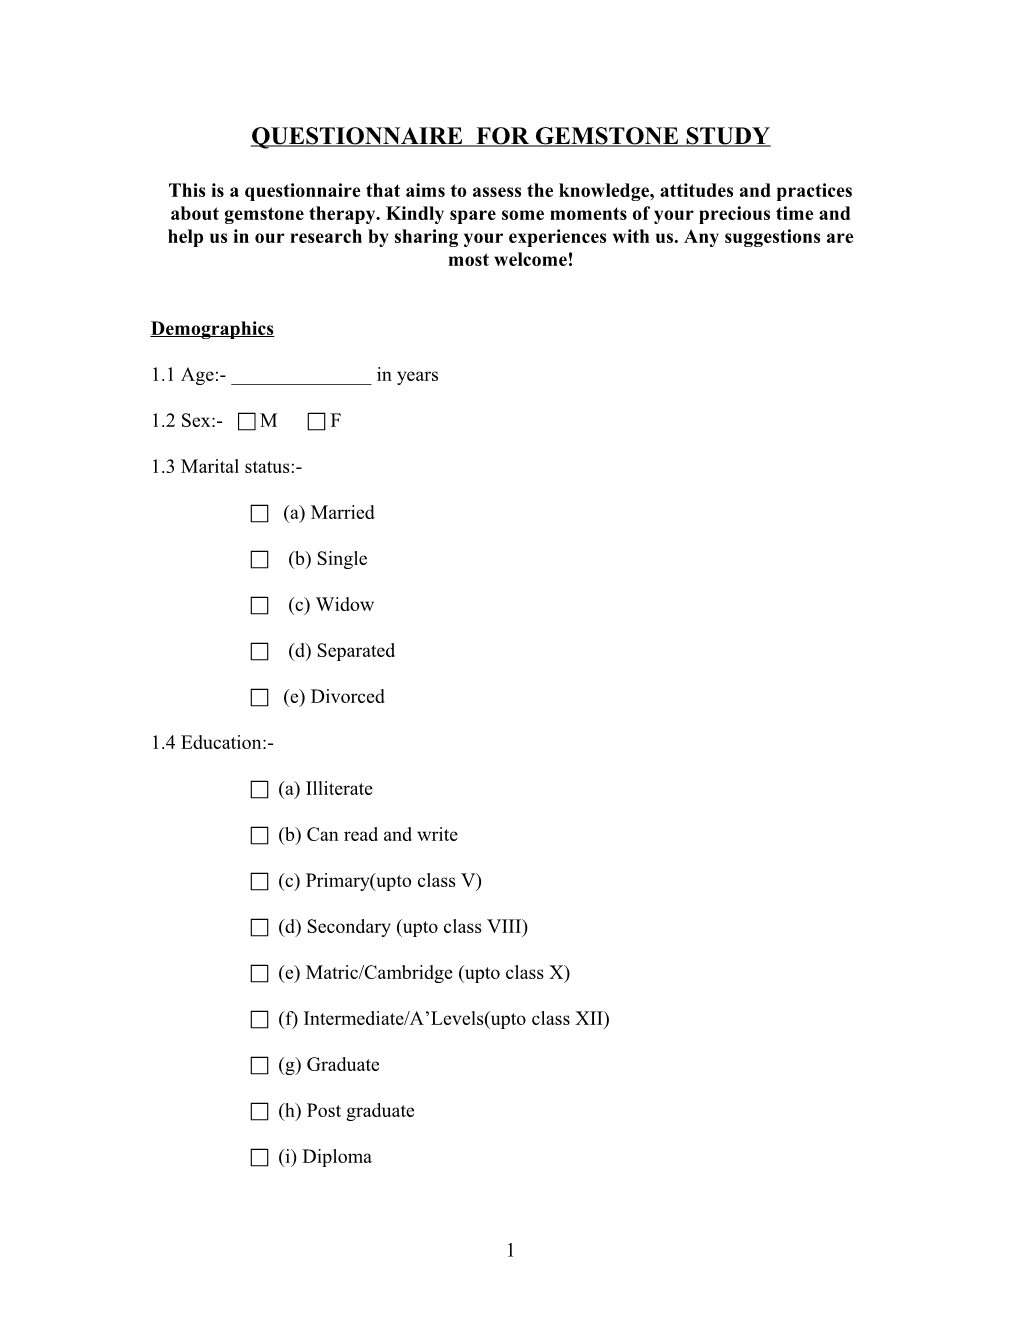 Questionnaire for Gemstone Study